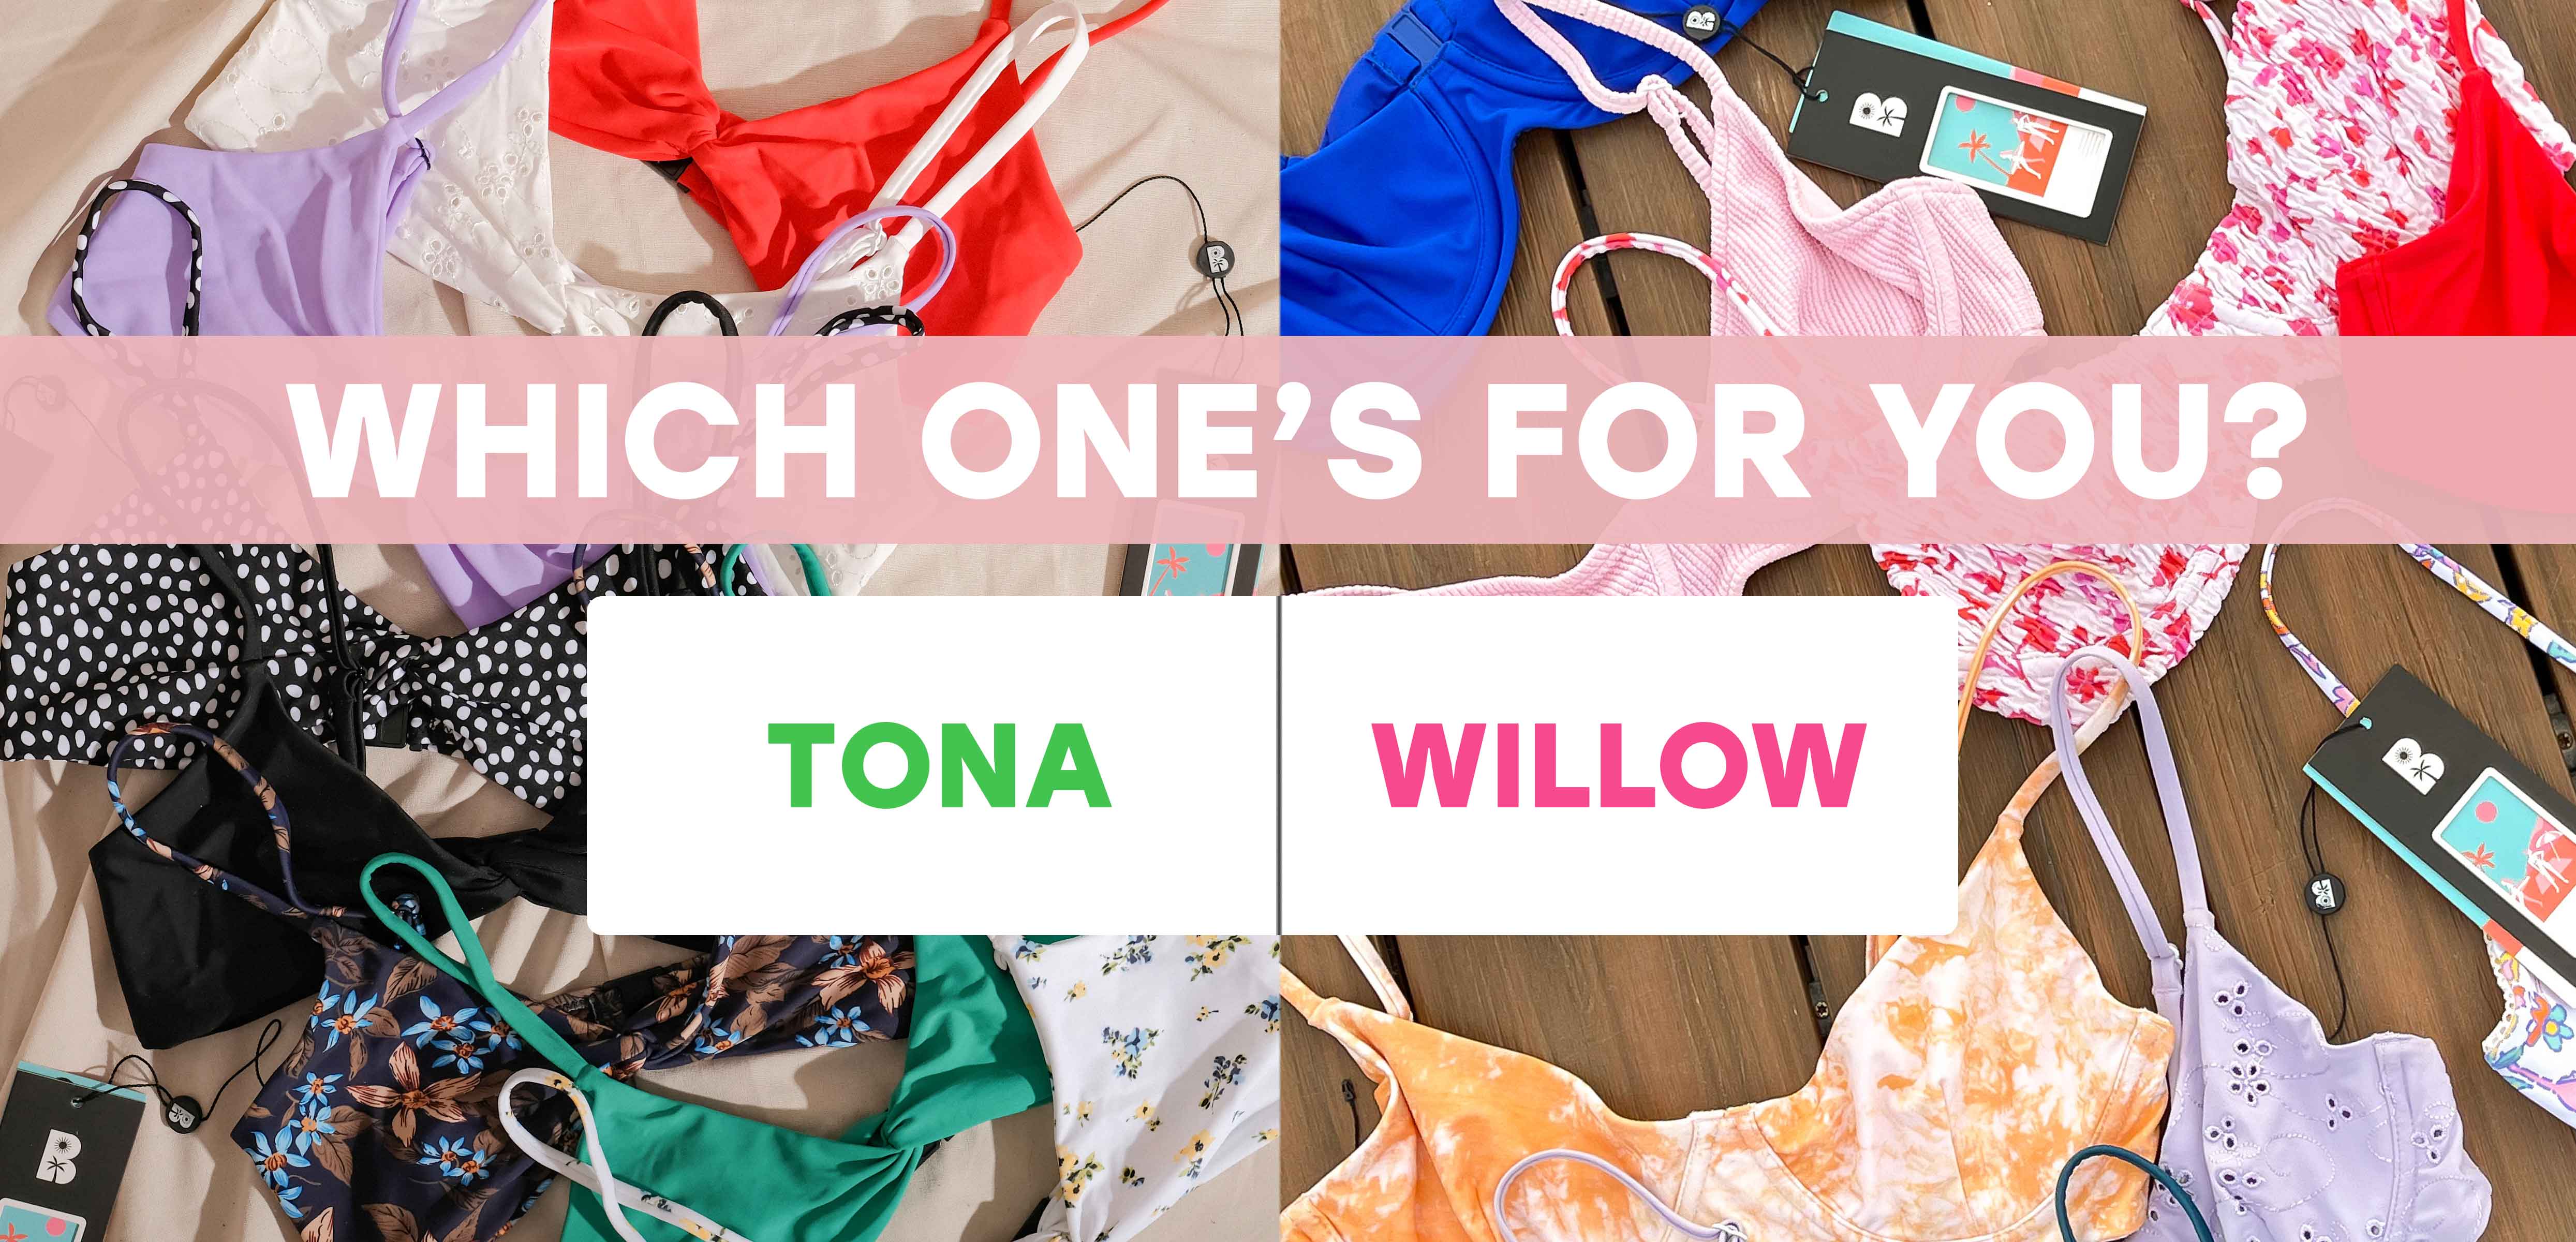 This or that: Willow or Tona?